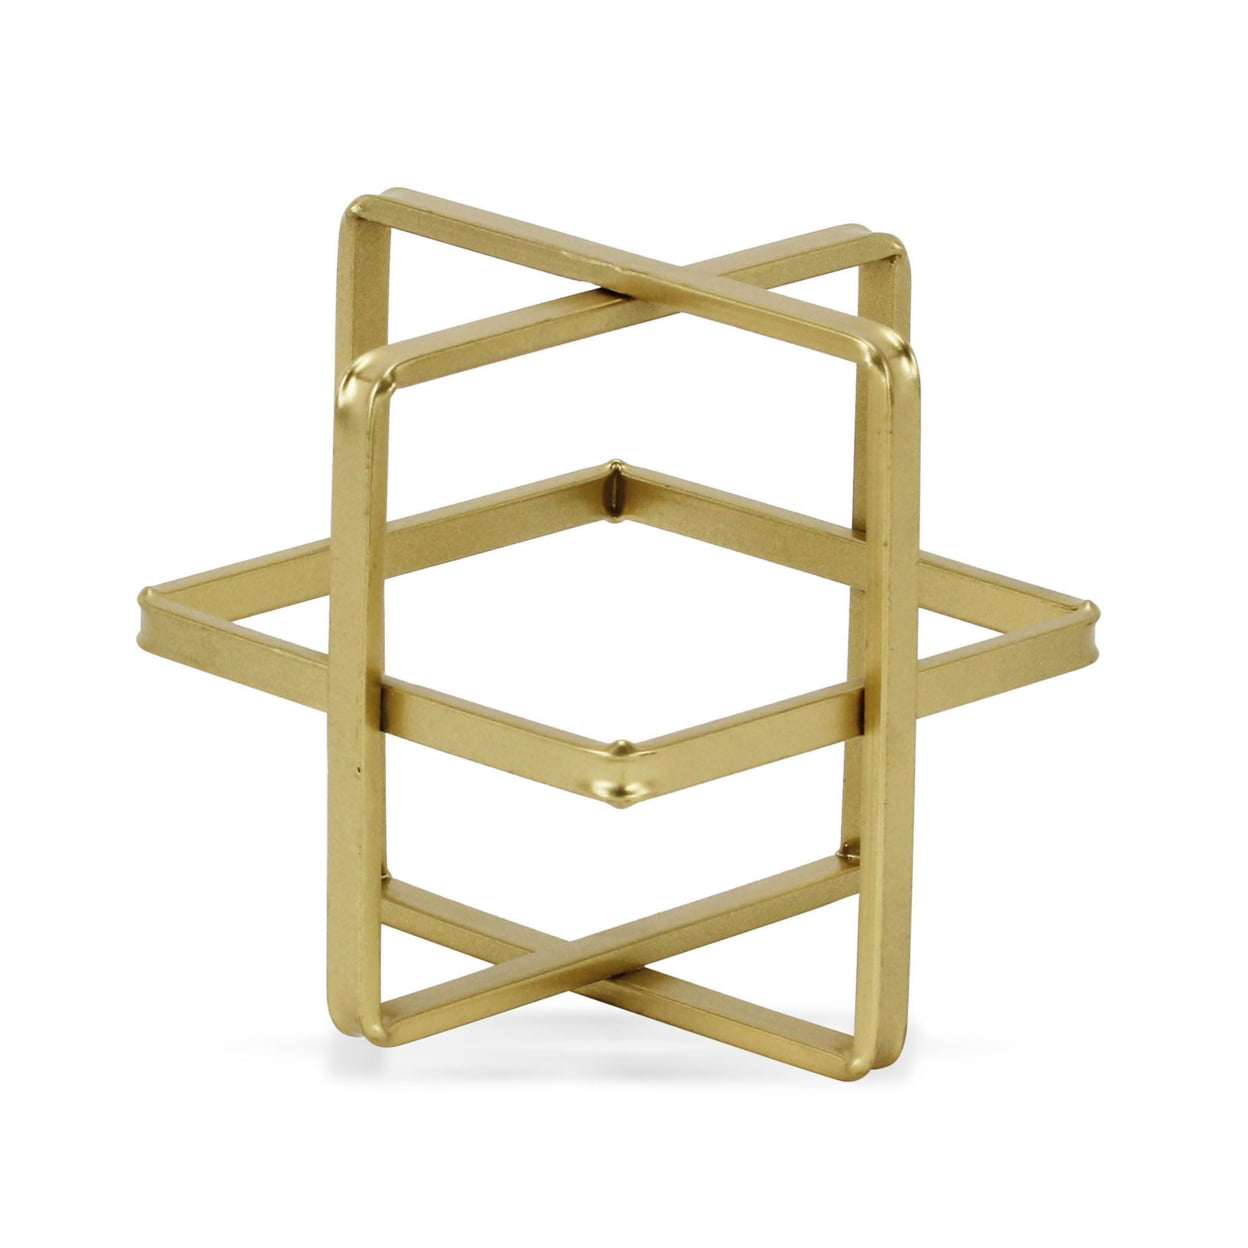 Cheungs 5699L-GD Alle Geometric Decor Cube, Gold - Large